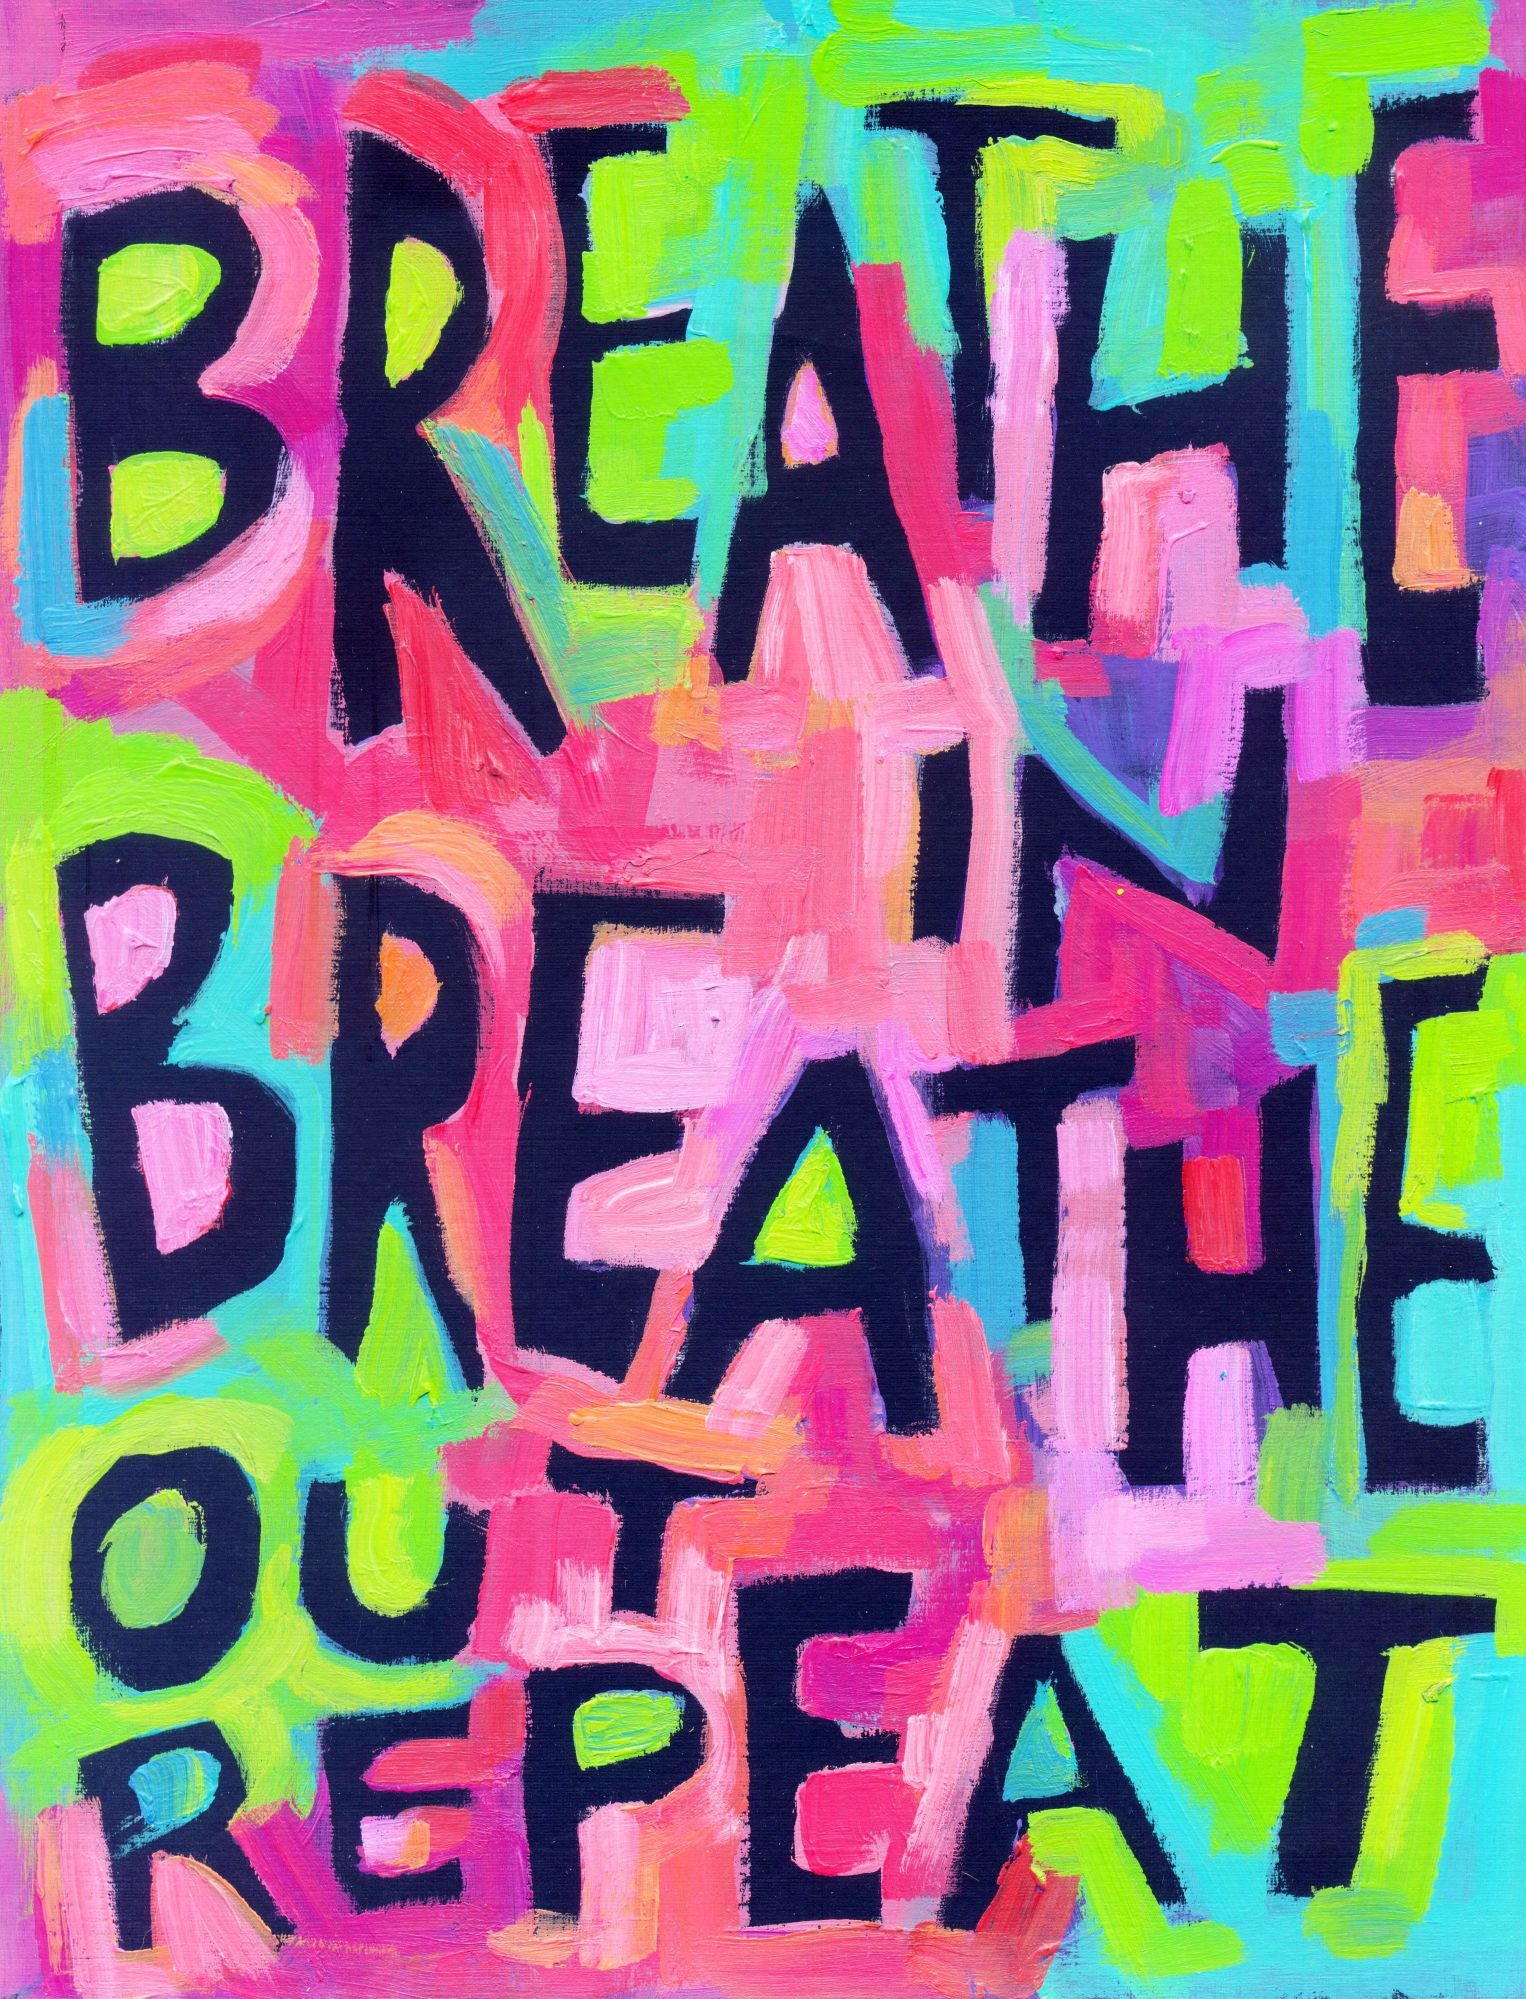 Breathe in Breathe out - Repeat Positive Wall art -$9.99 in 3 sizes ...